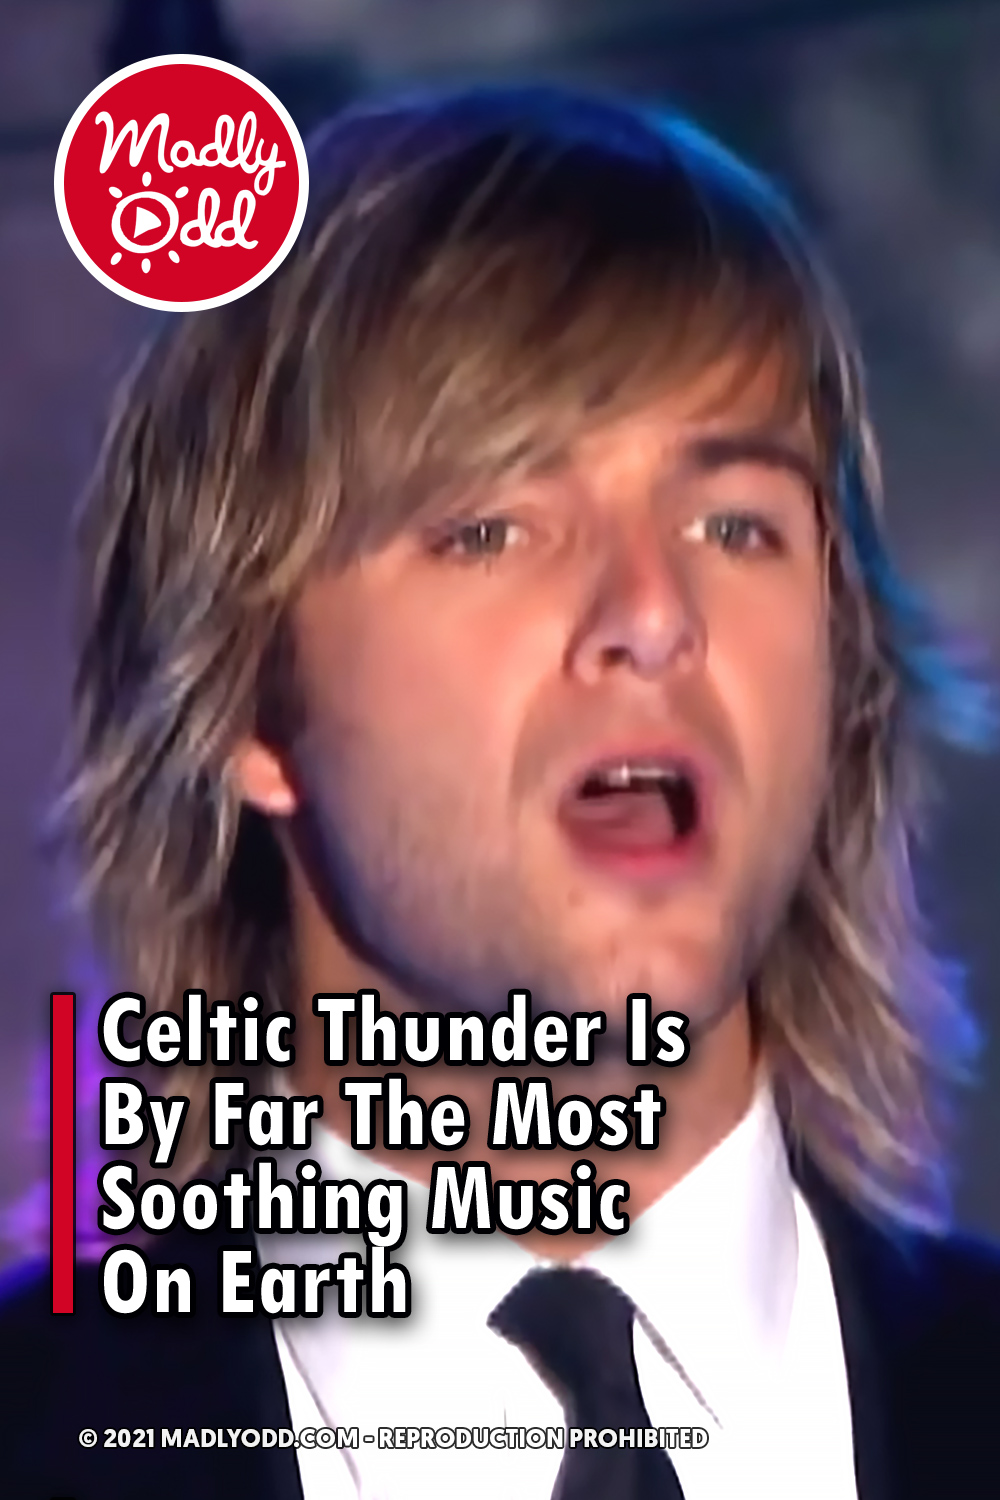 Celtic Thunder Is By Far The Most Soothing Music On Earth